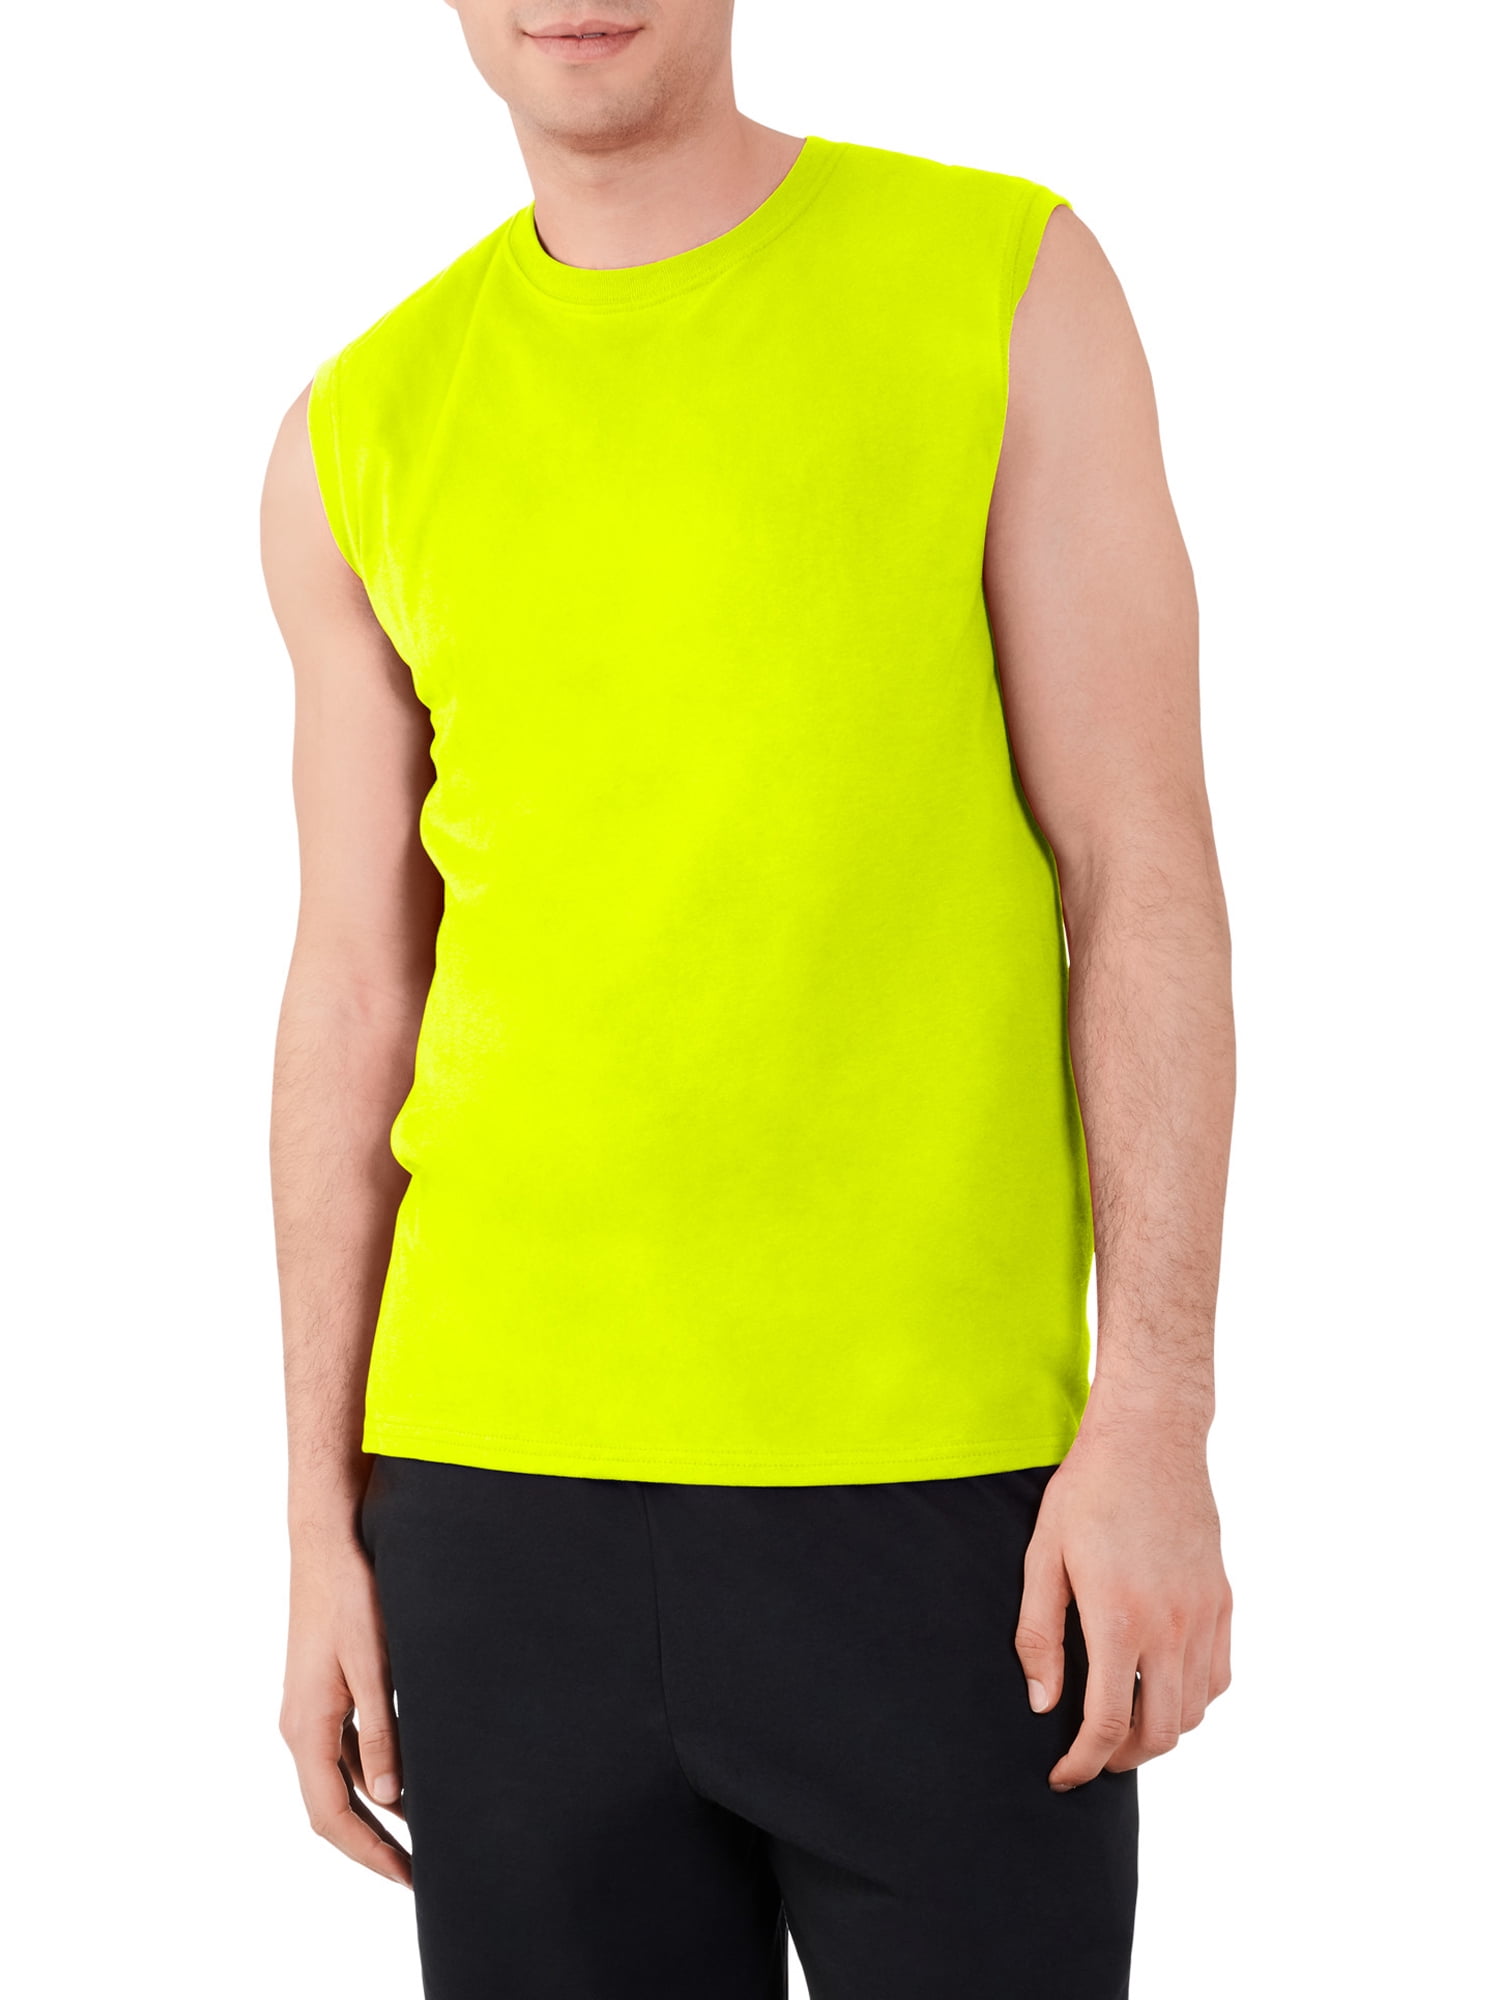 Fruit of the Loom Men's Sleeveless Muscle Tank Top, Sizes S-3XL